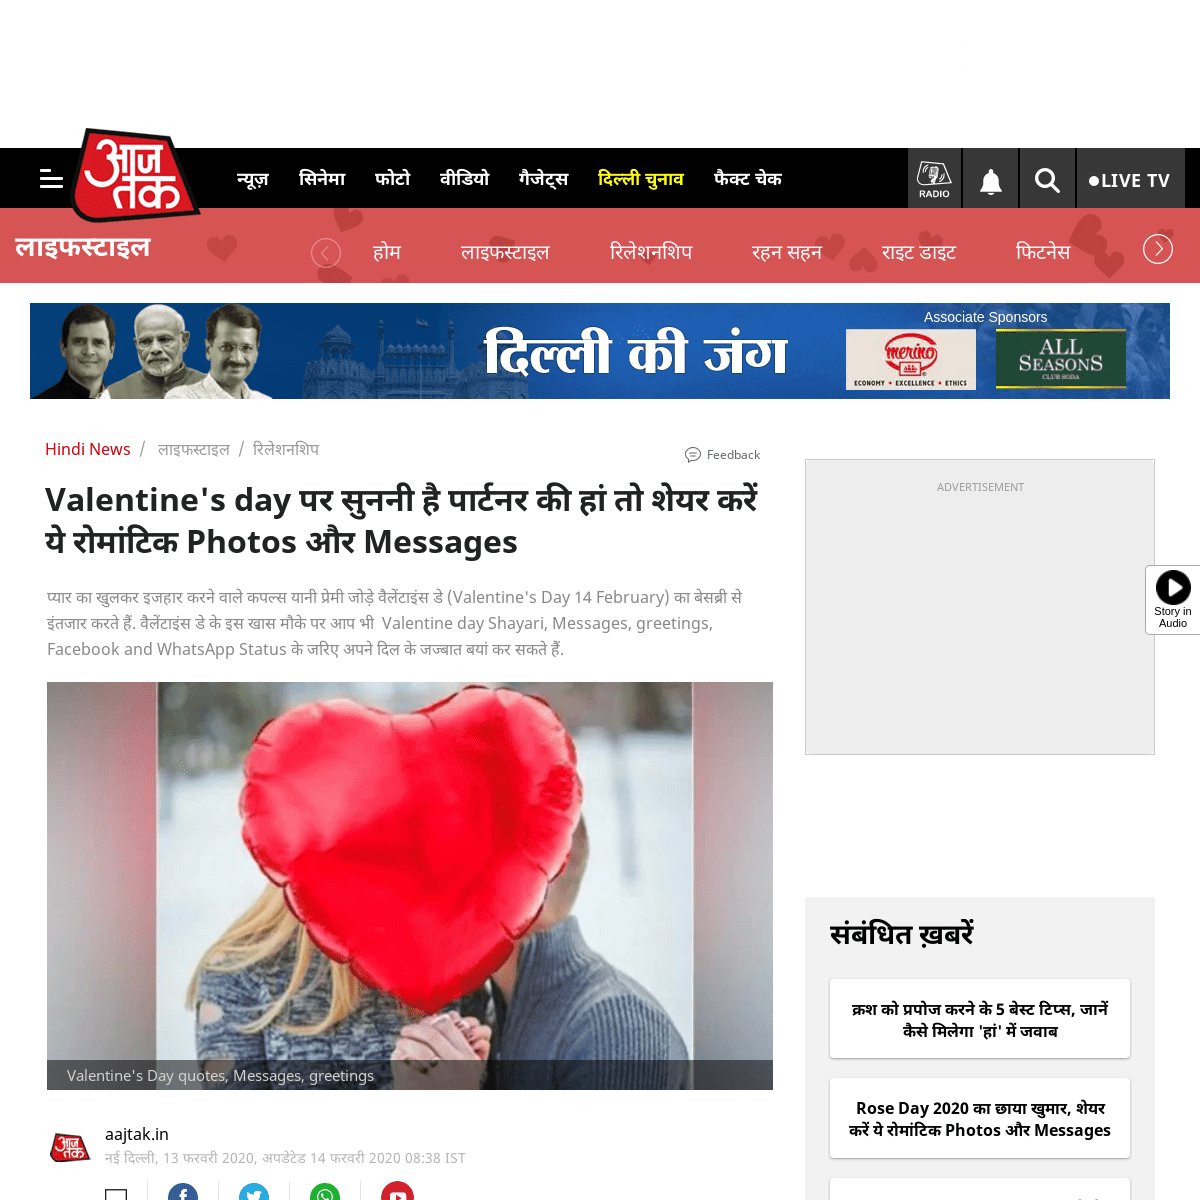 A complete backup of aajtak.intoday.in/story/valentine-day-2020-messages-shayeri-quotes-greetings-whatsapp-facebook-status-love-